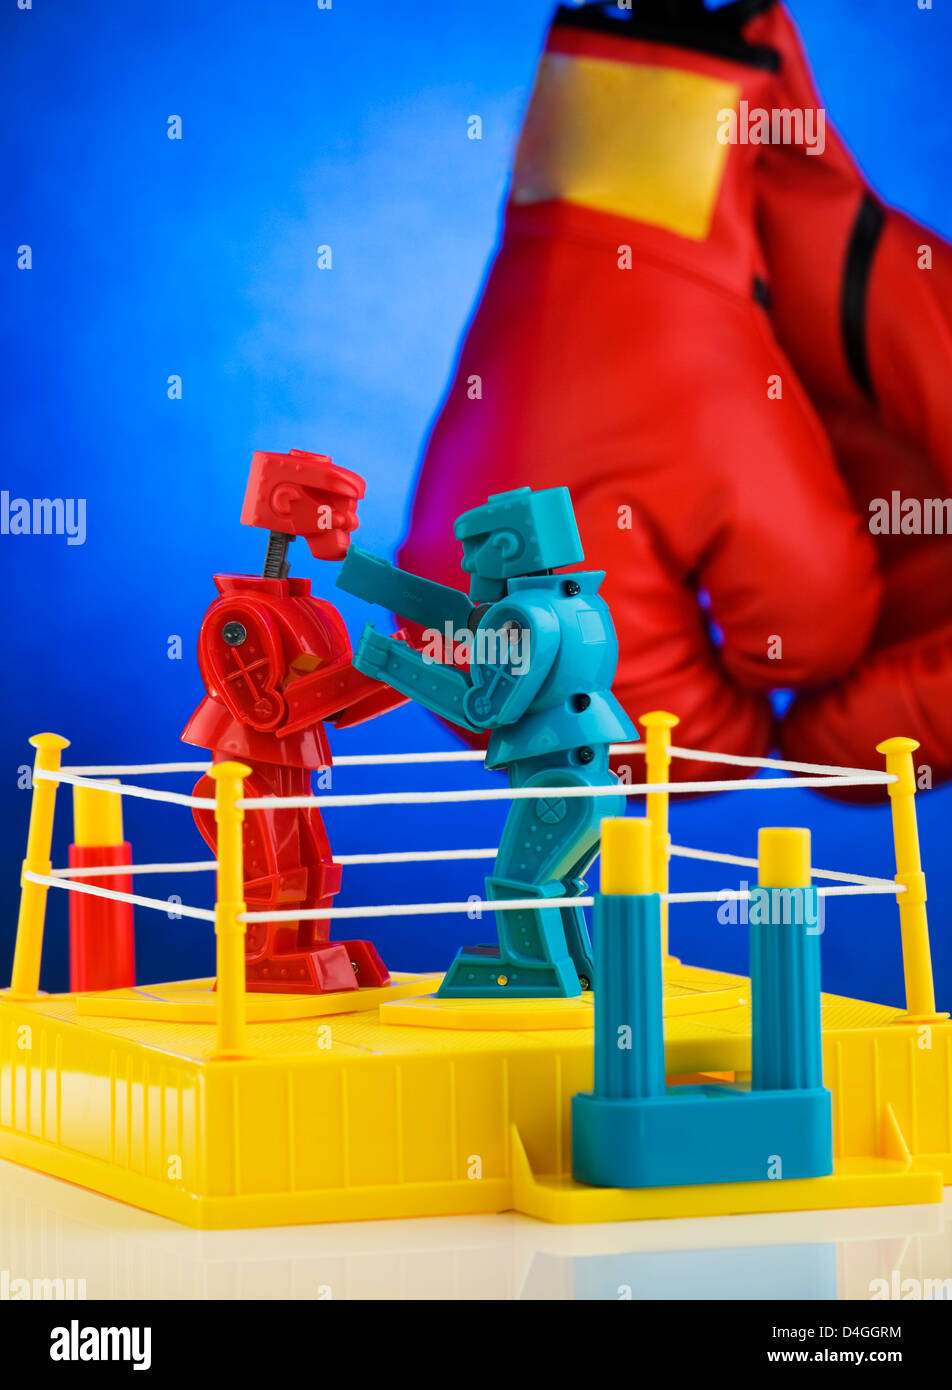 Rock 'em Sock 'em Robots a classic game by Mattel toys. With boxing gloves (removed logo) in background. Stock Photo